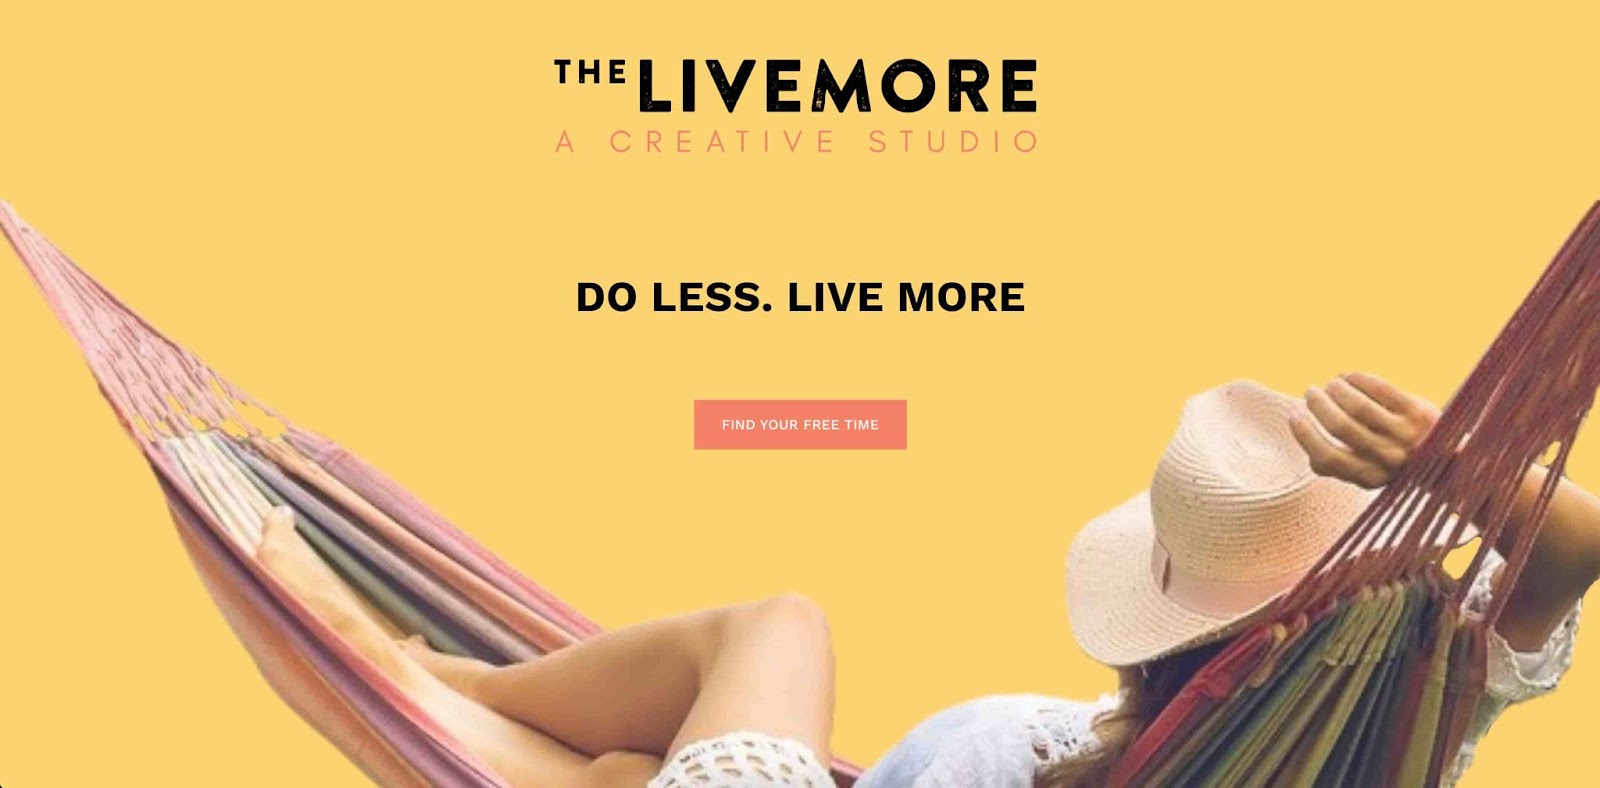 live more creative studio virtual assistant website example, woman hanging from hammock